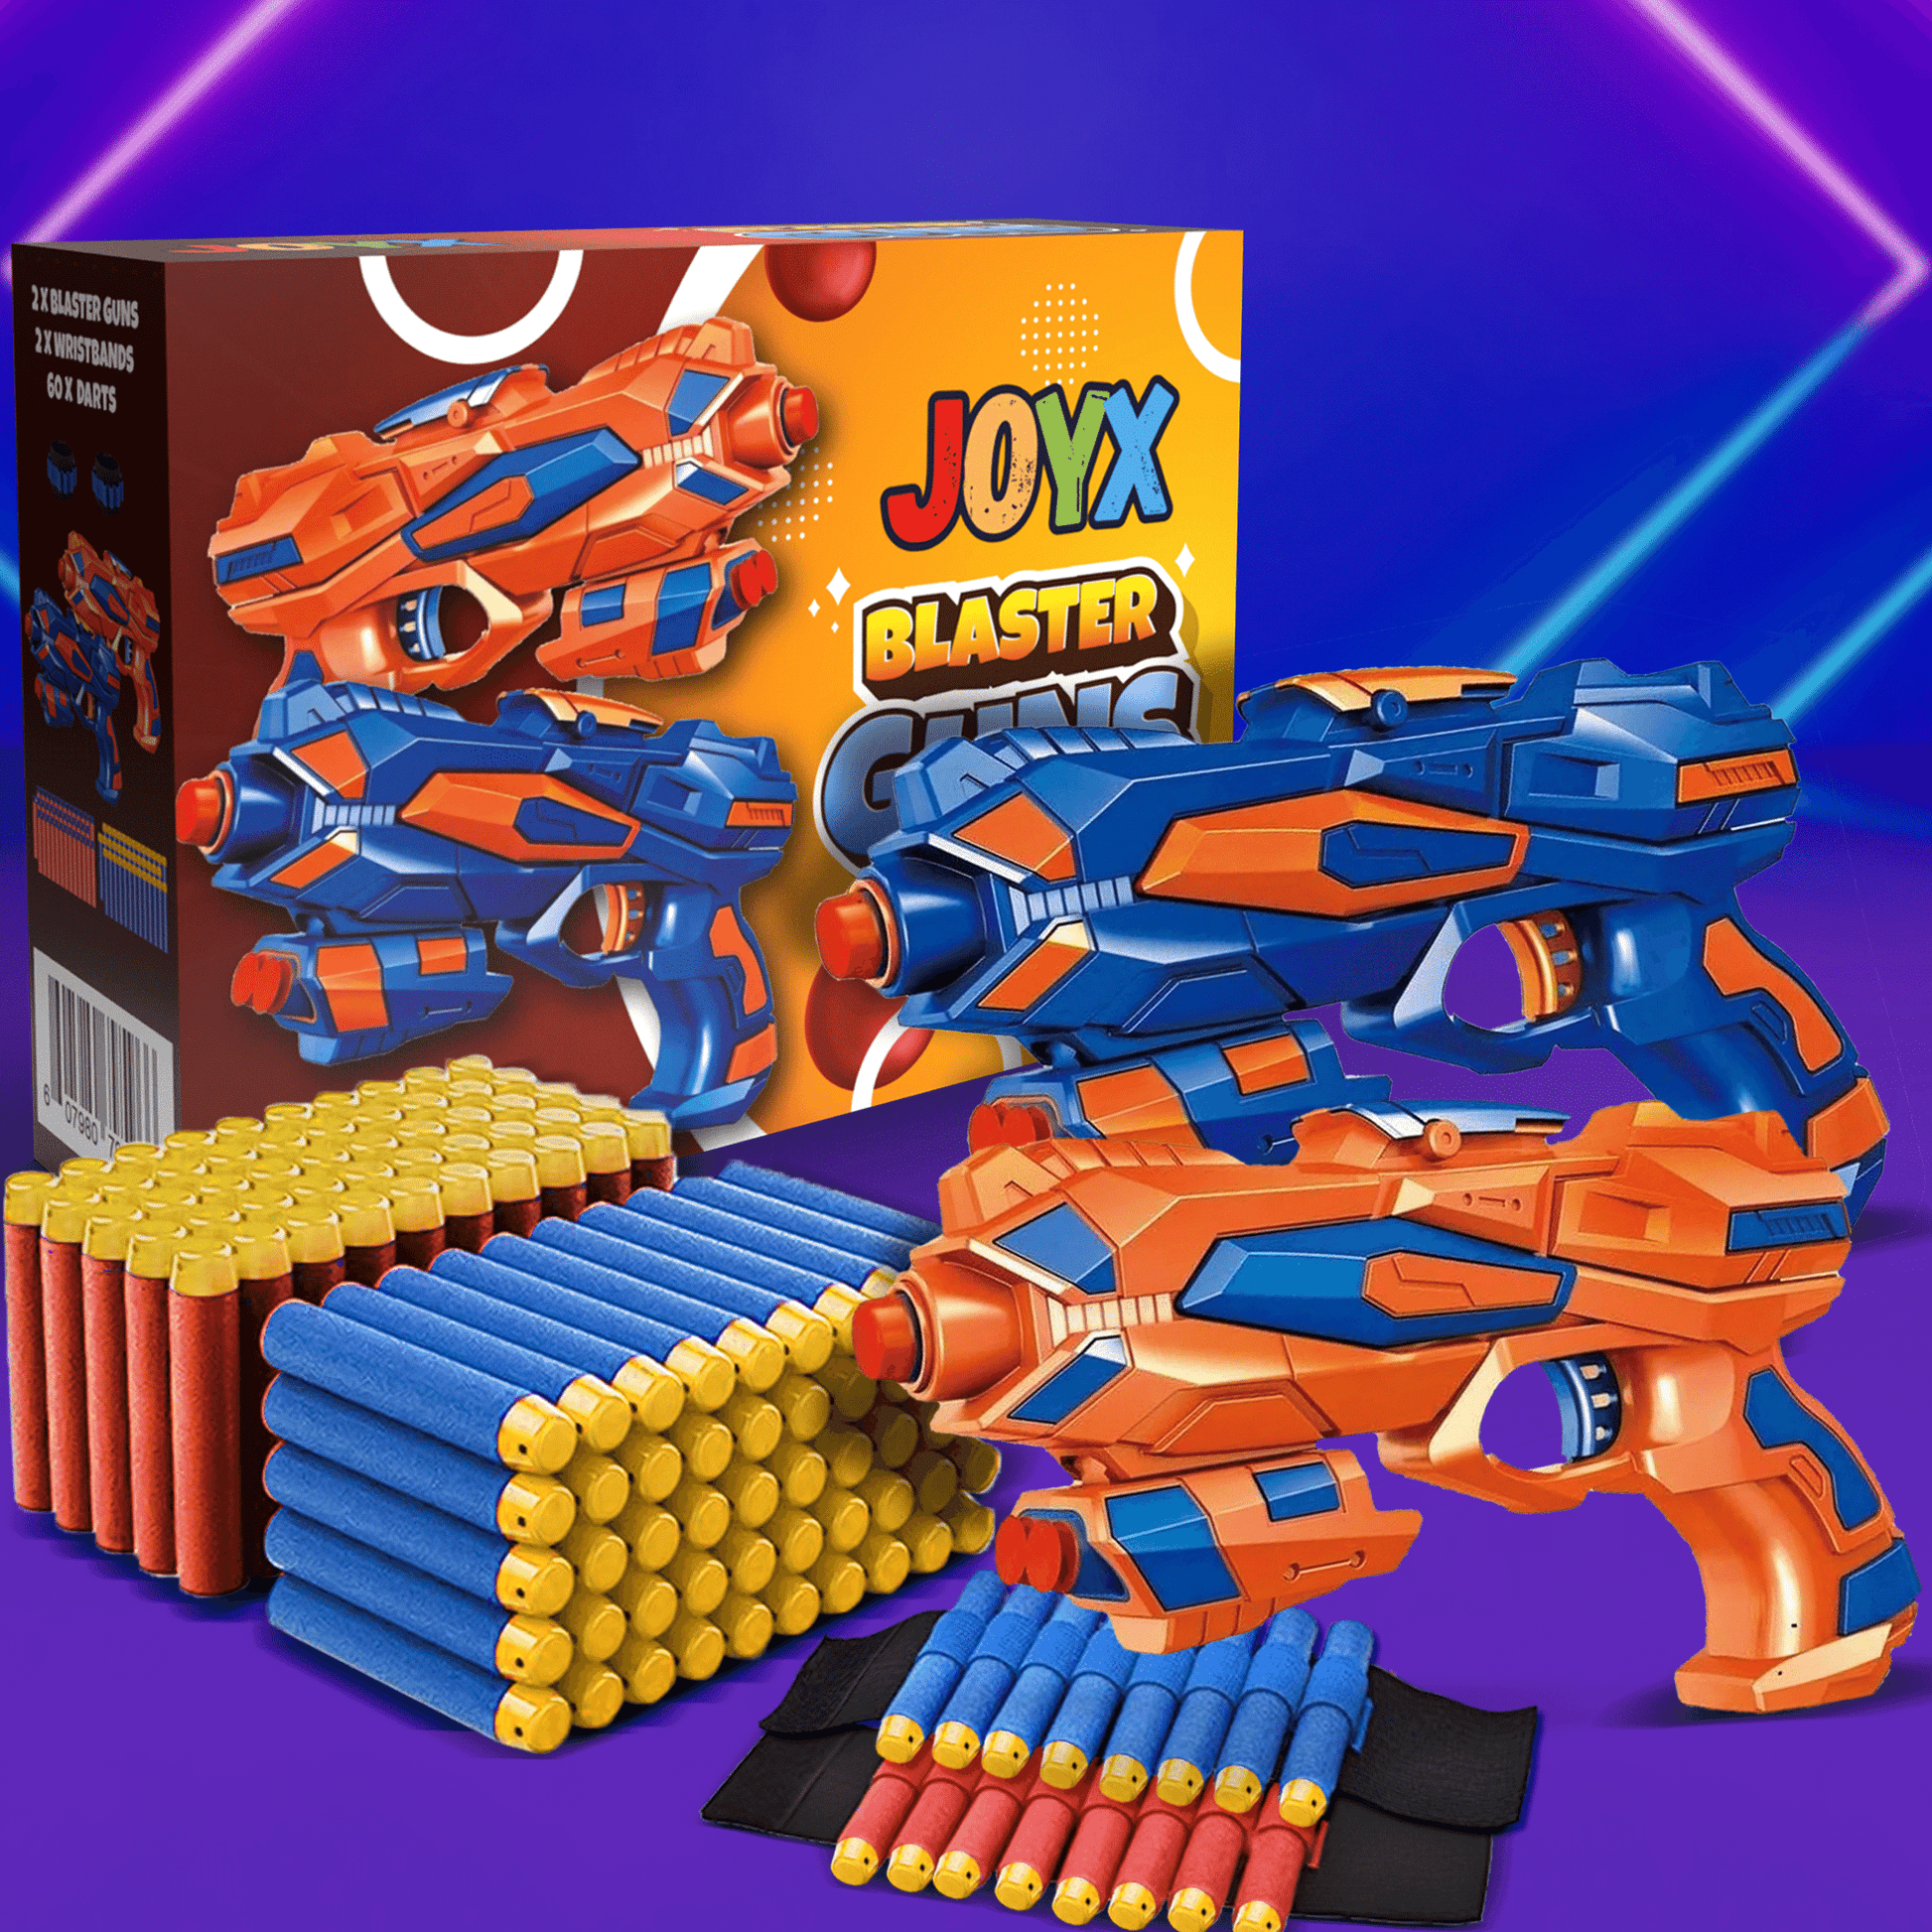 2 Pack Blaster Guns in orange and blue with multiple foam dart packs and digital score counters on a action background.